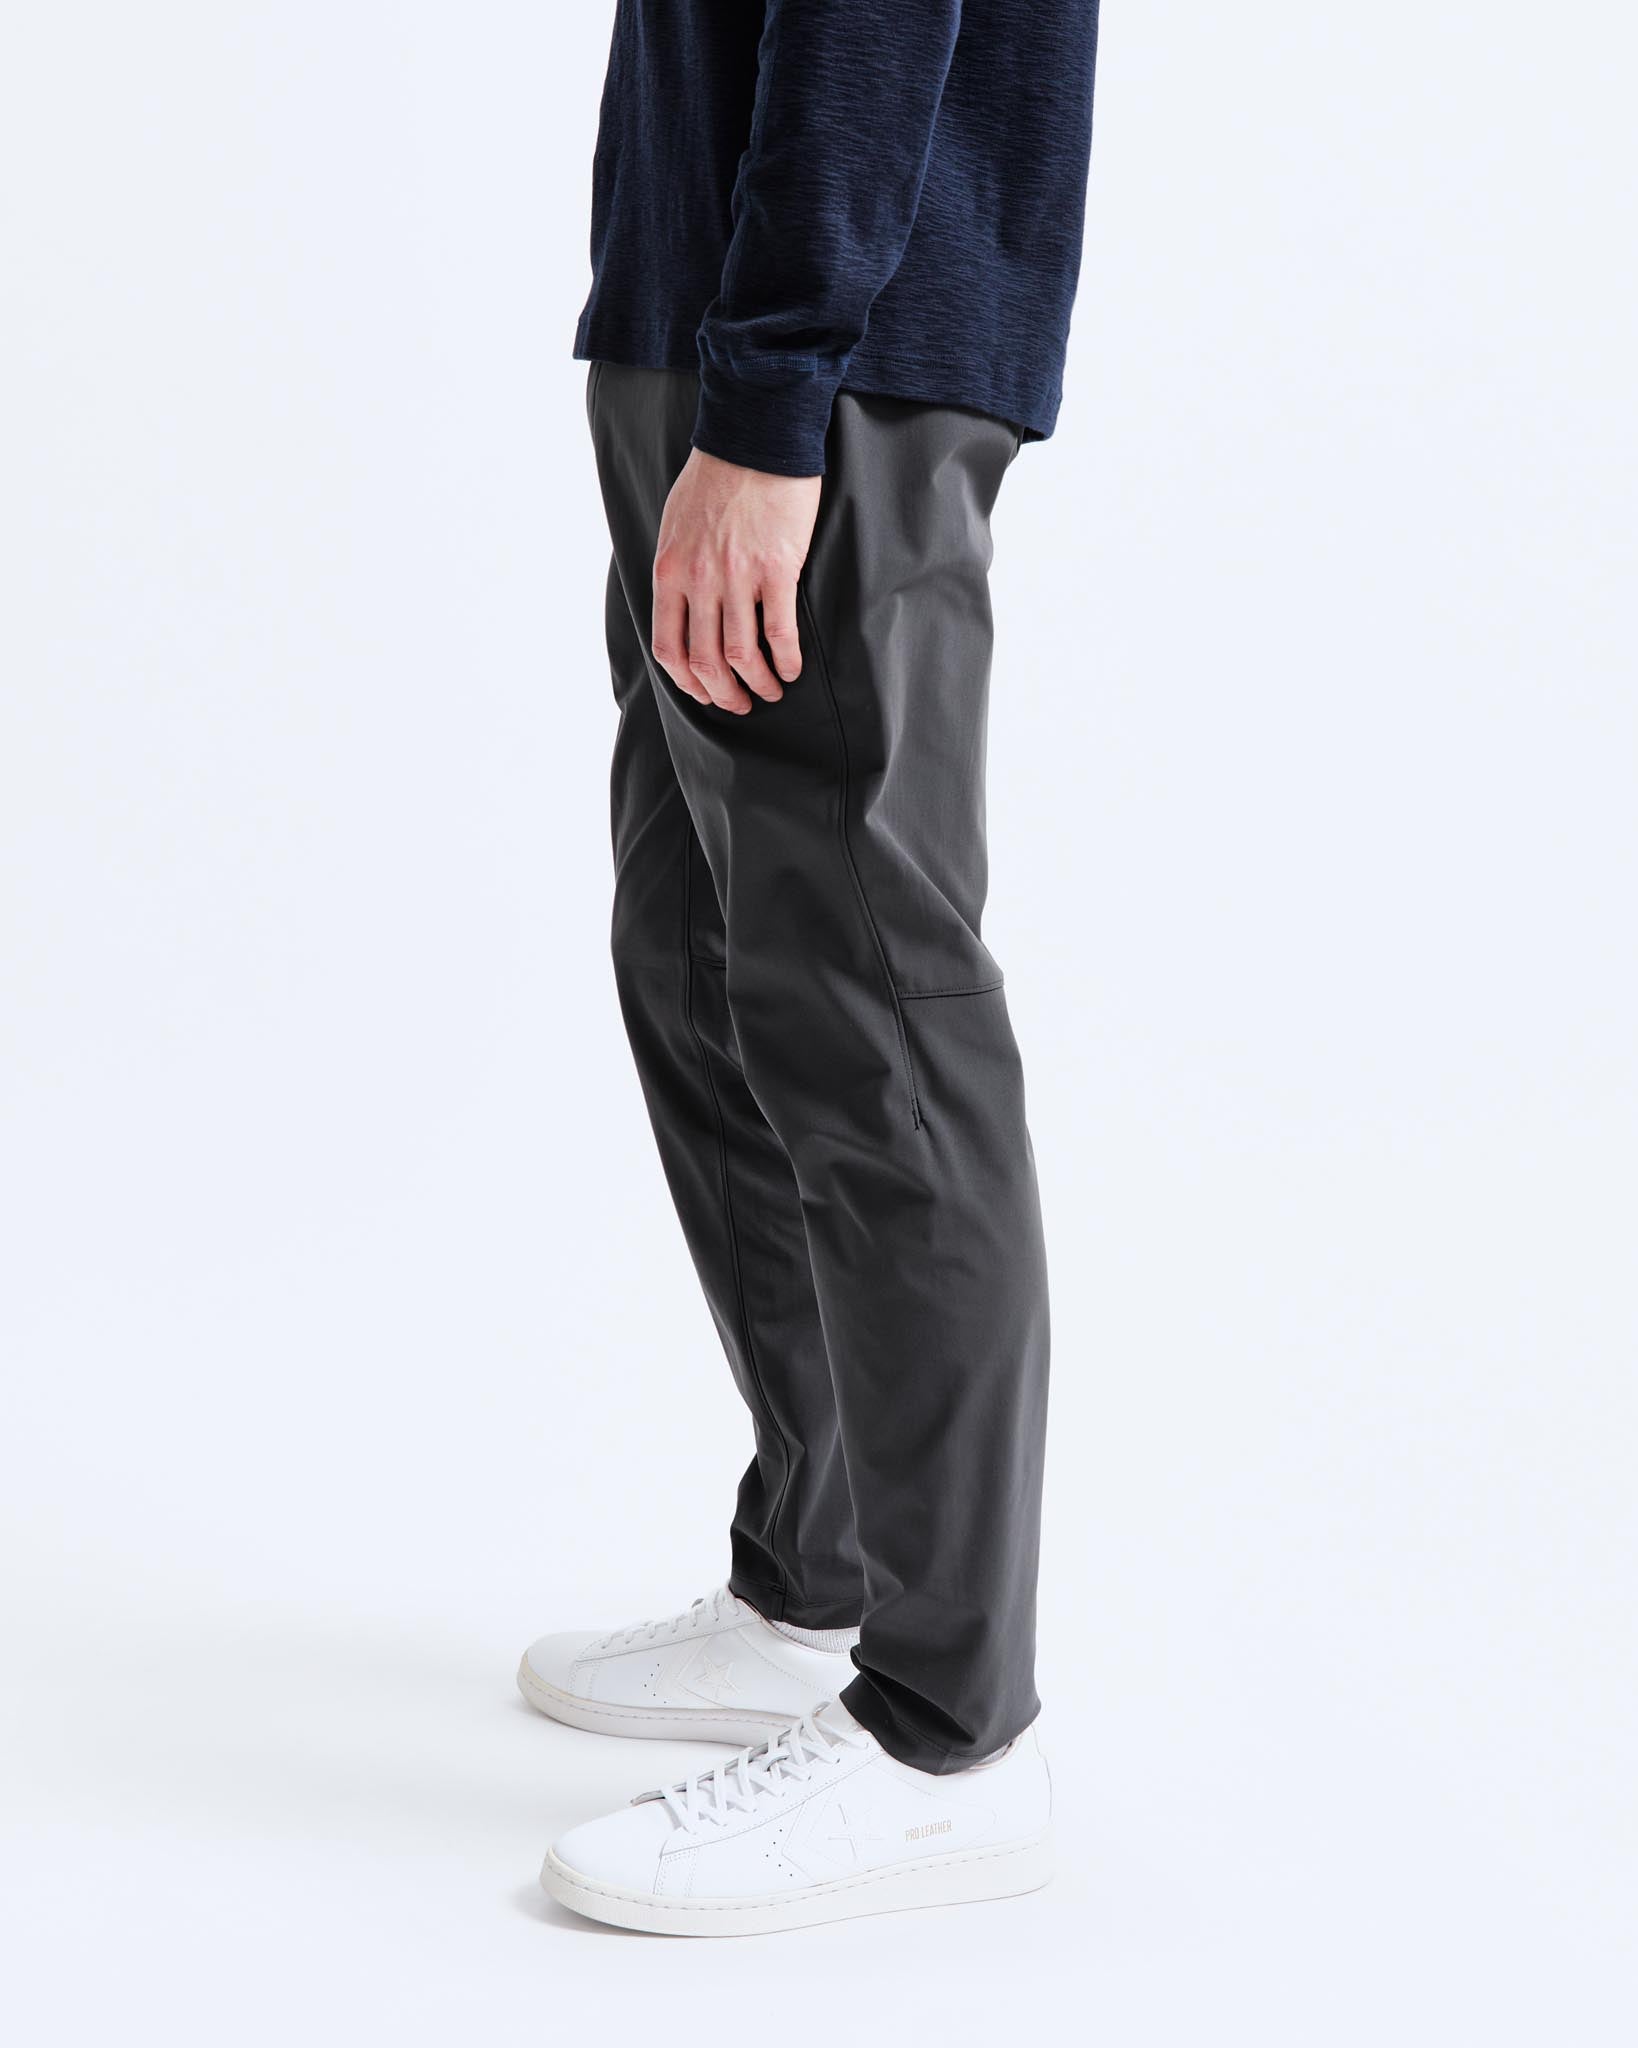 Coach's Pant | Reigning Champ